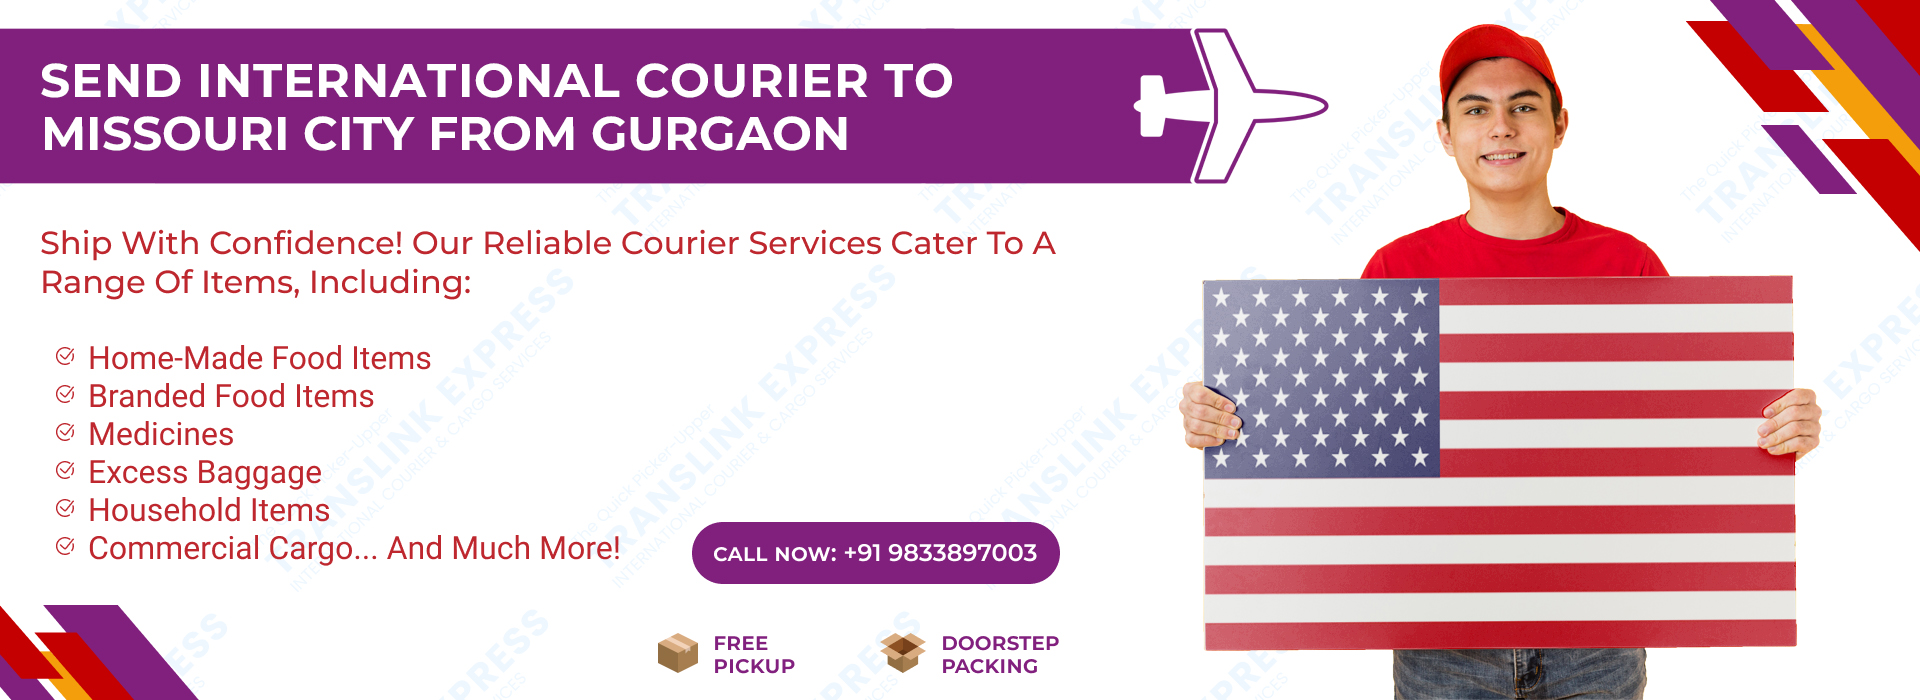 Courier to Missouri City From Gurgaon